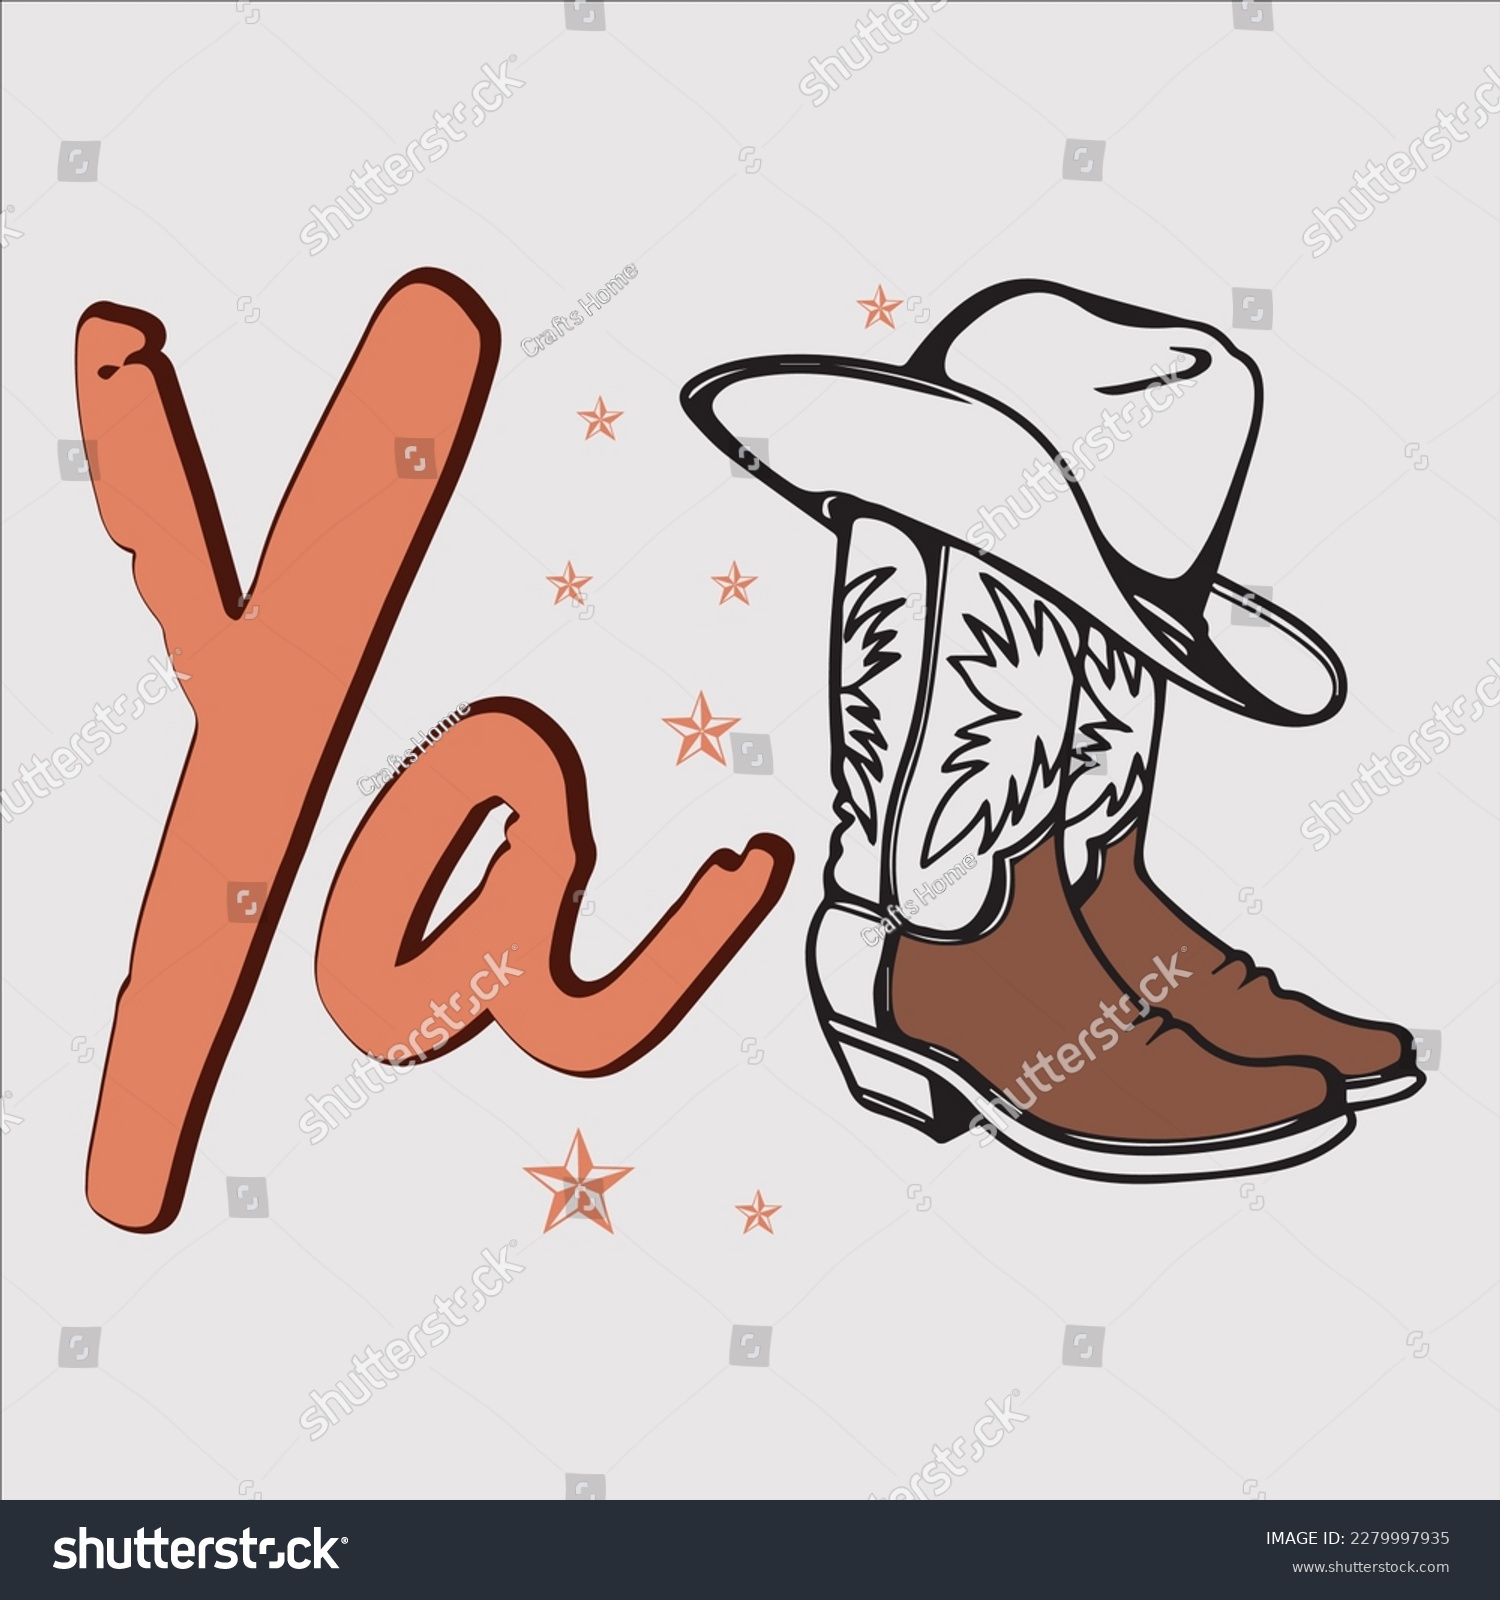 SVG of  cowboy, cowgirl, western, texas, country, cowboy hat, hey, funny, cowboy boots, howdy, svg